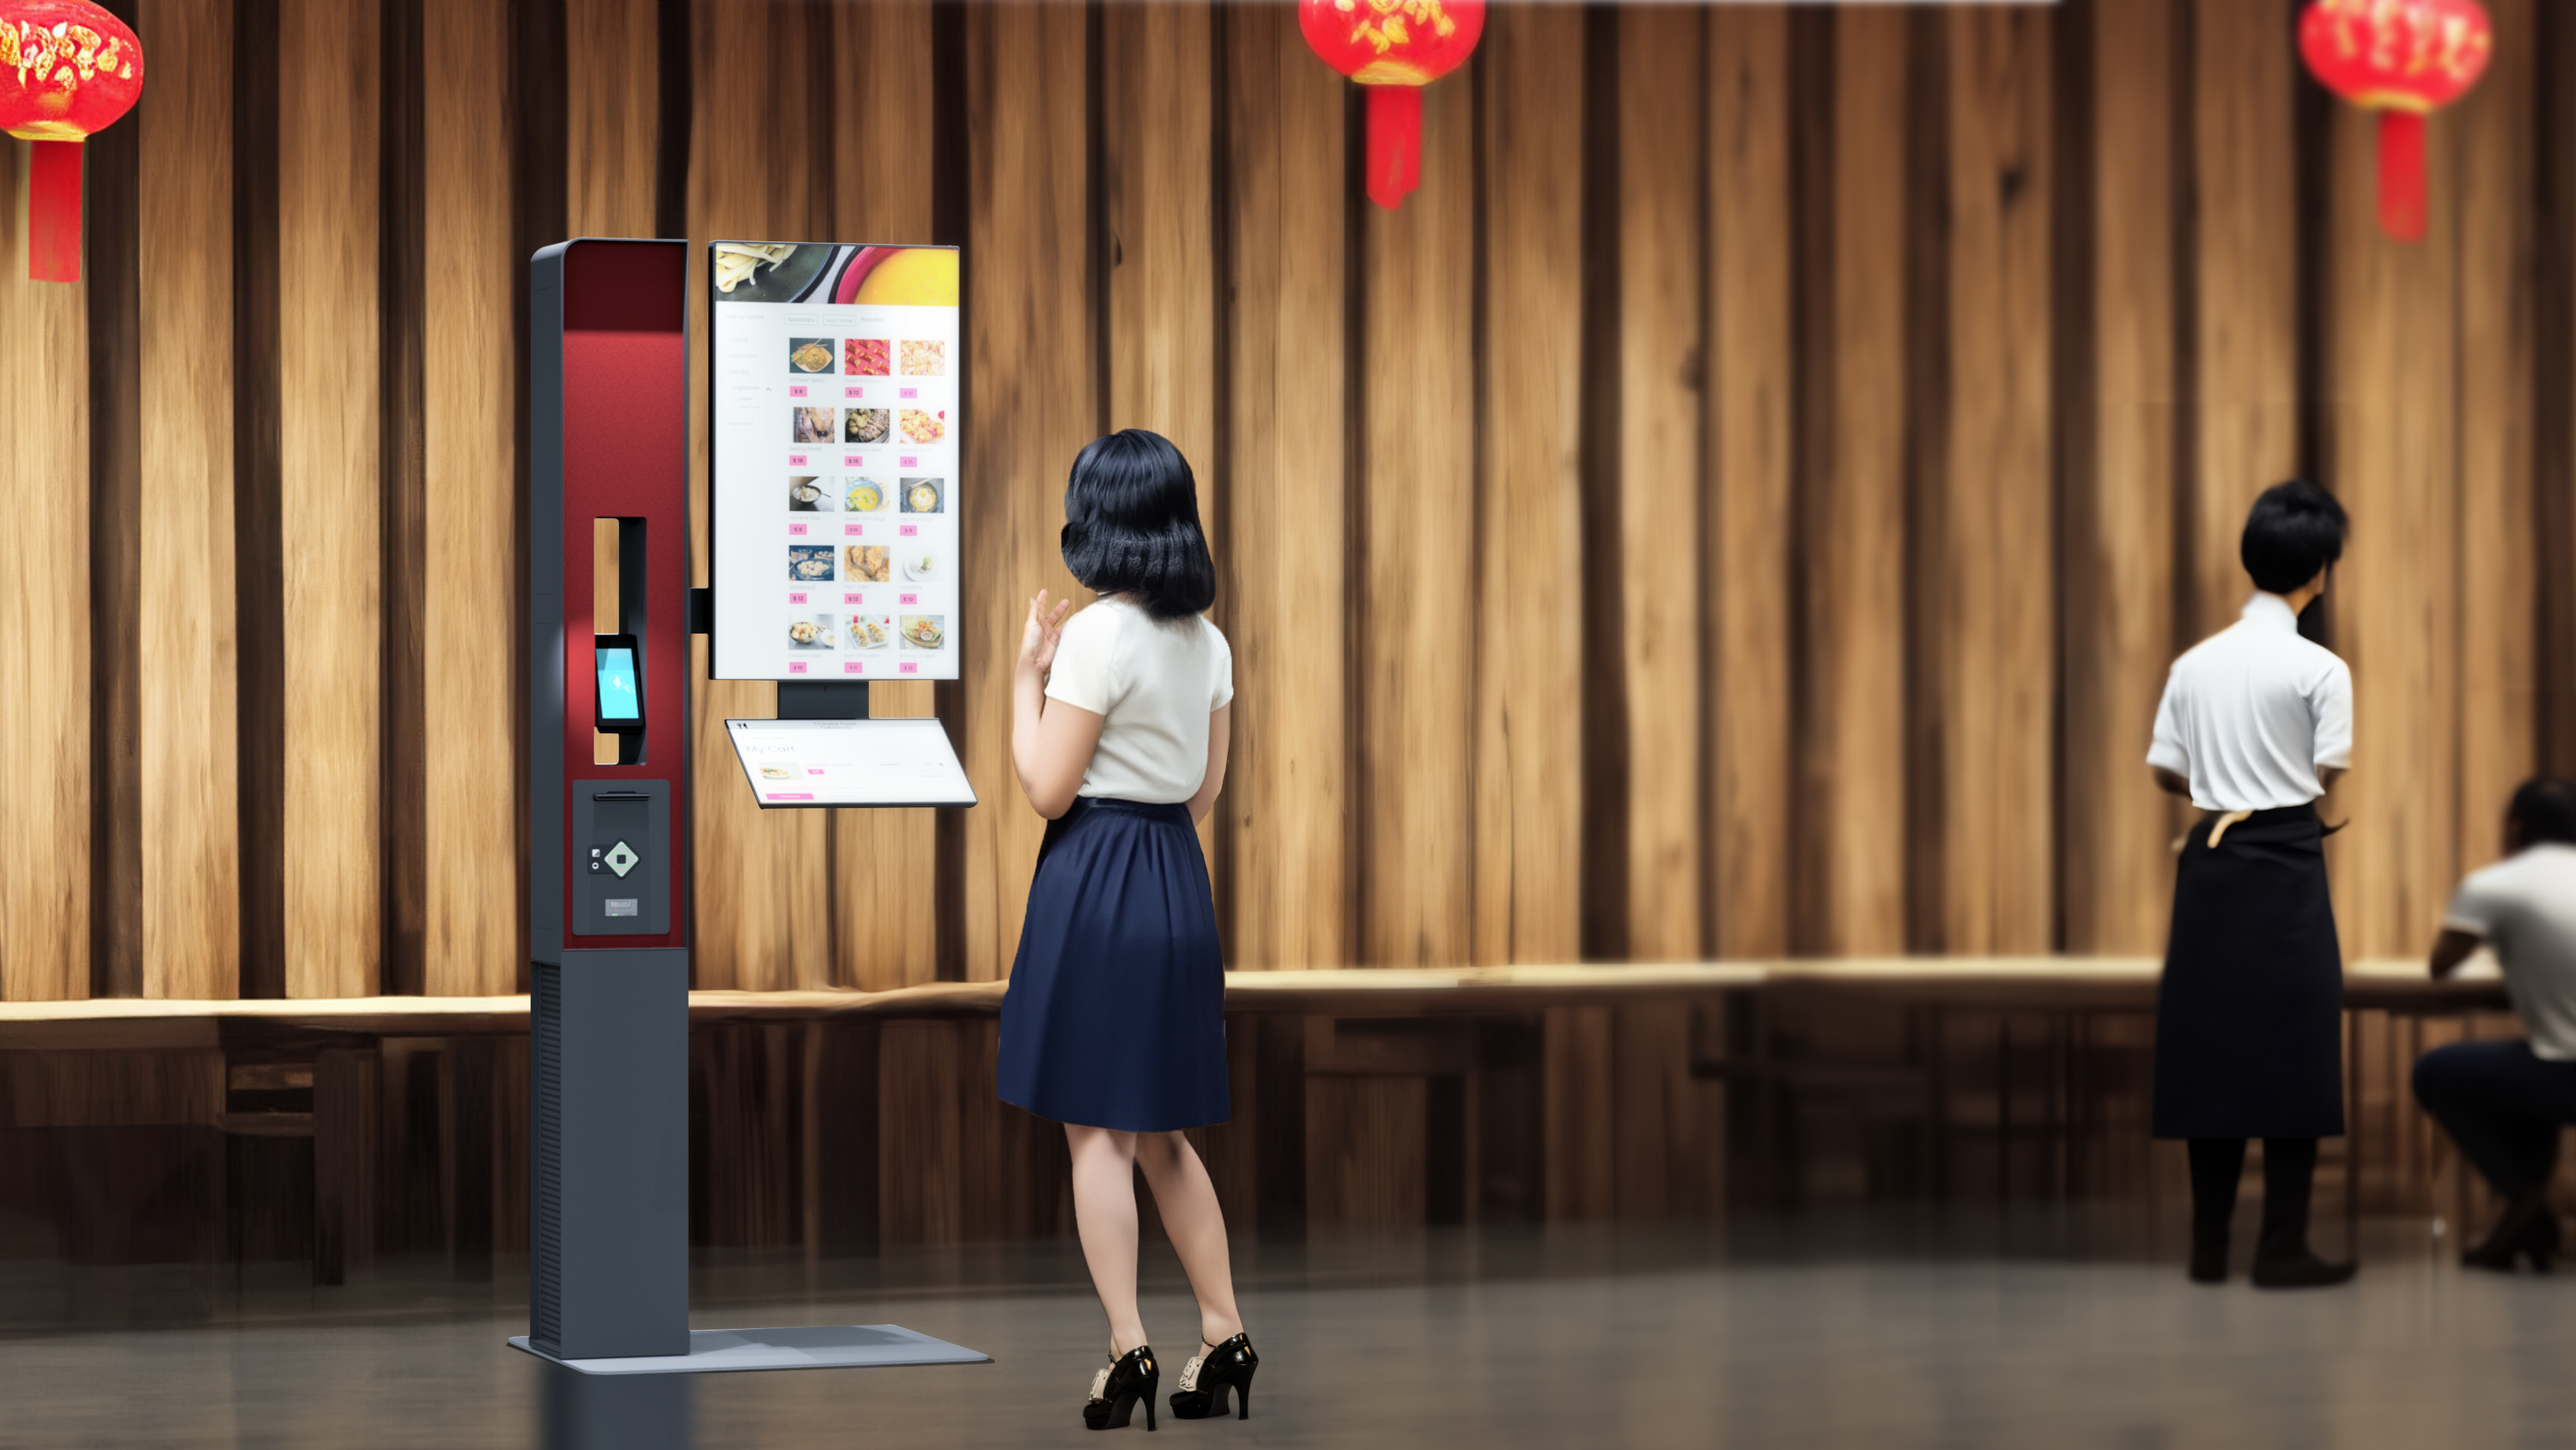 Chinese Restaurant Owners: It's Time to Make the Kiosk Move!